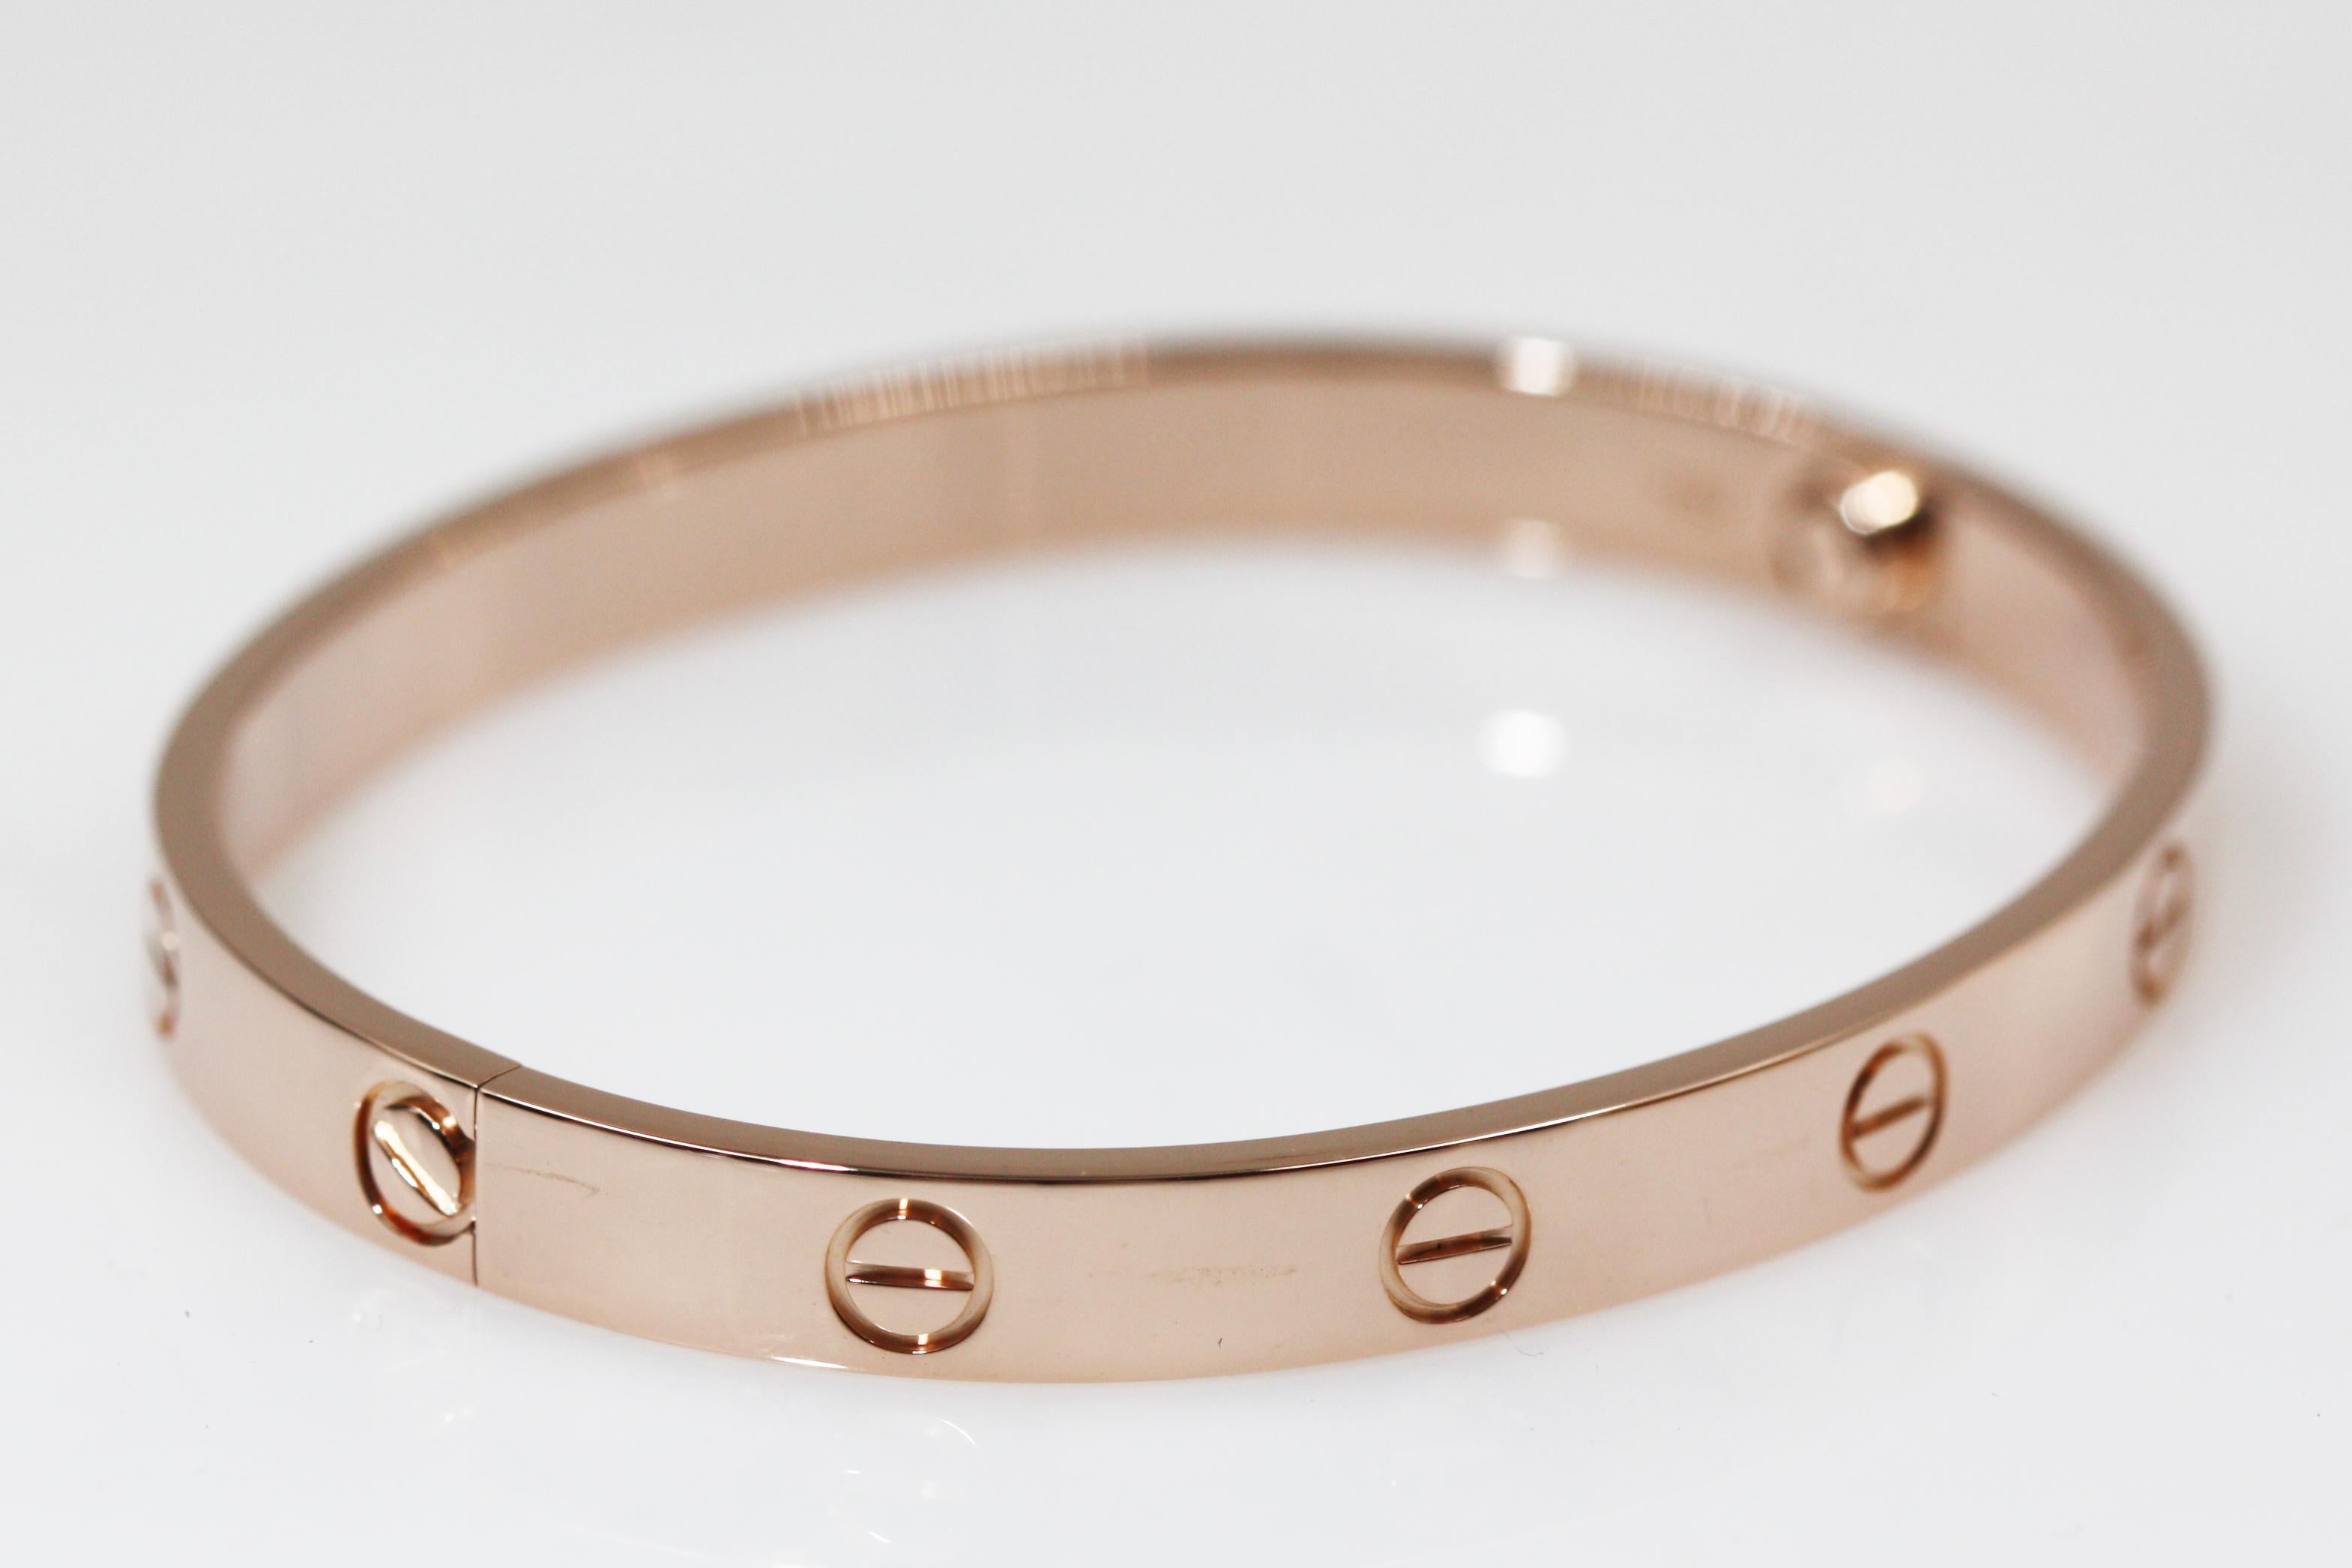 A Beautiful bracelet from Cartier Love collection, made in 18K rose gold. The bracelet have the iconic screw motif. REF: B6035617

Size 17
We have other size available, please feel free to ask.

This item will come with an original box and warranty